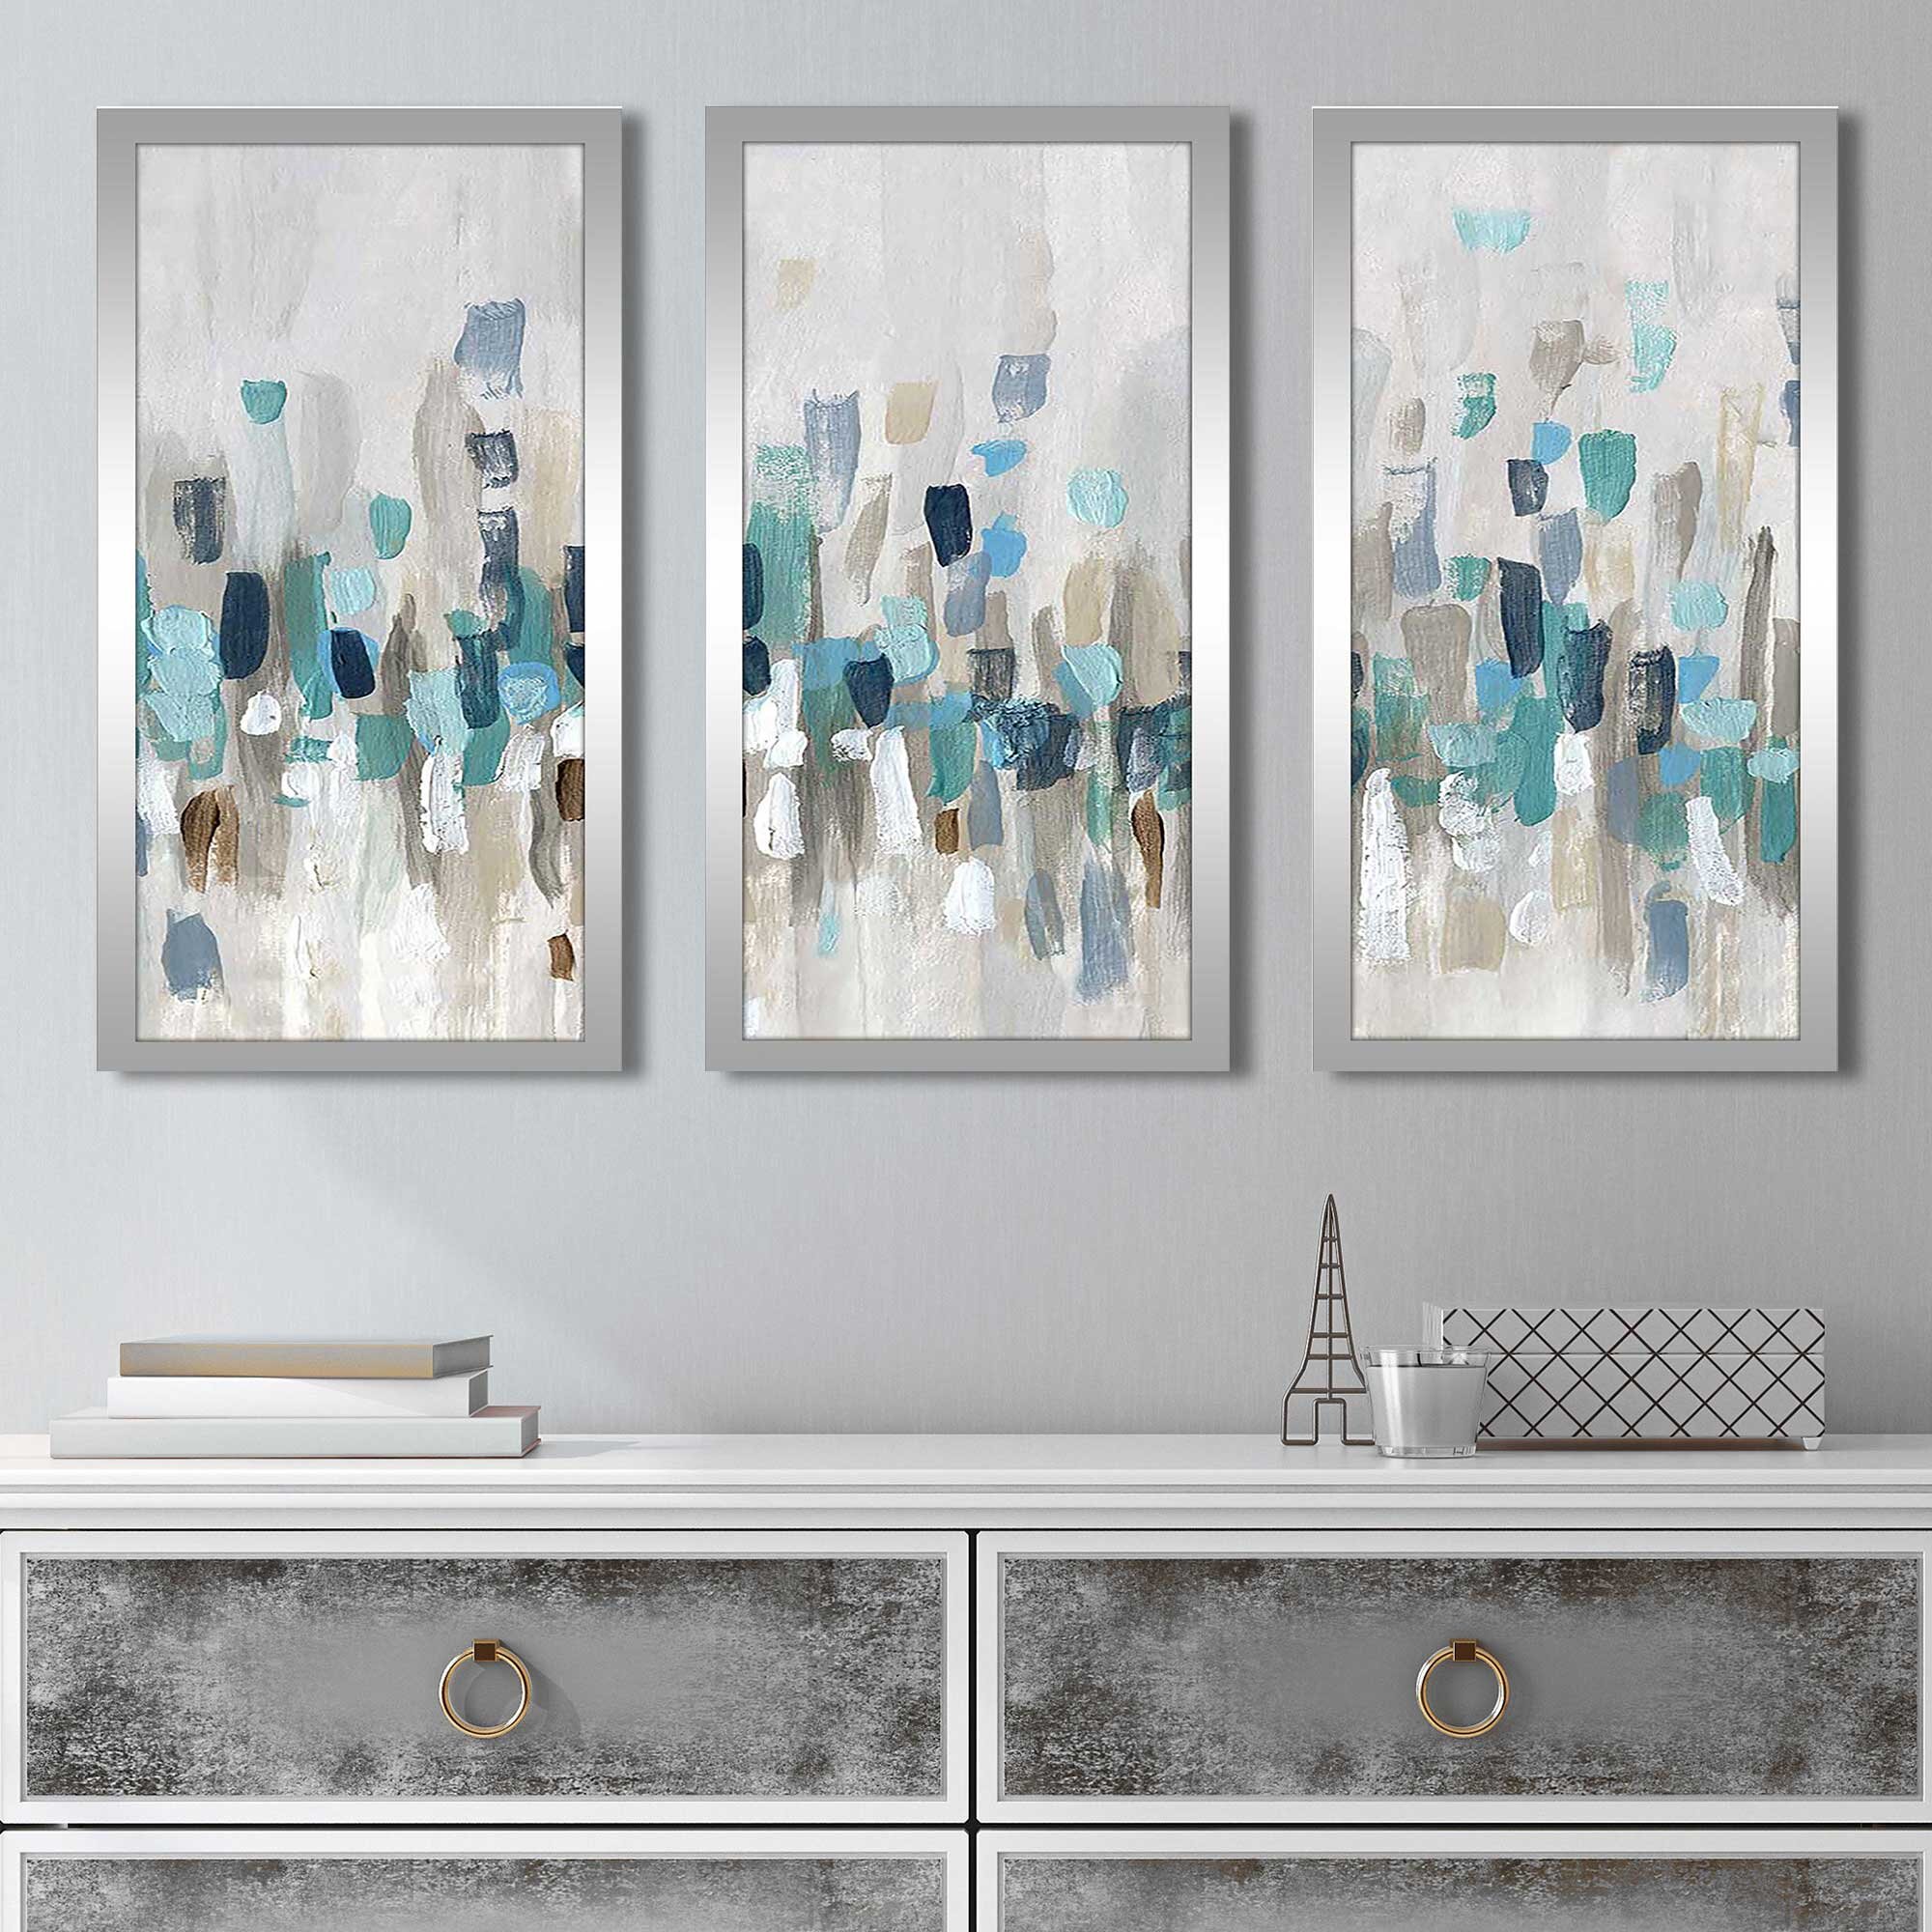 Wade Logan® Staccato Blue I Framed On Plastic / Acrylic 3 Pieces by Katrina  Craven Painting & Reviews | Wayfair